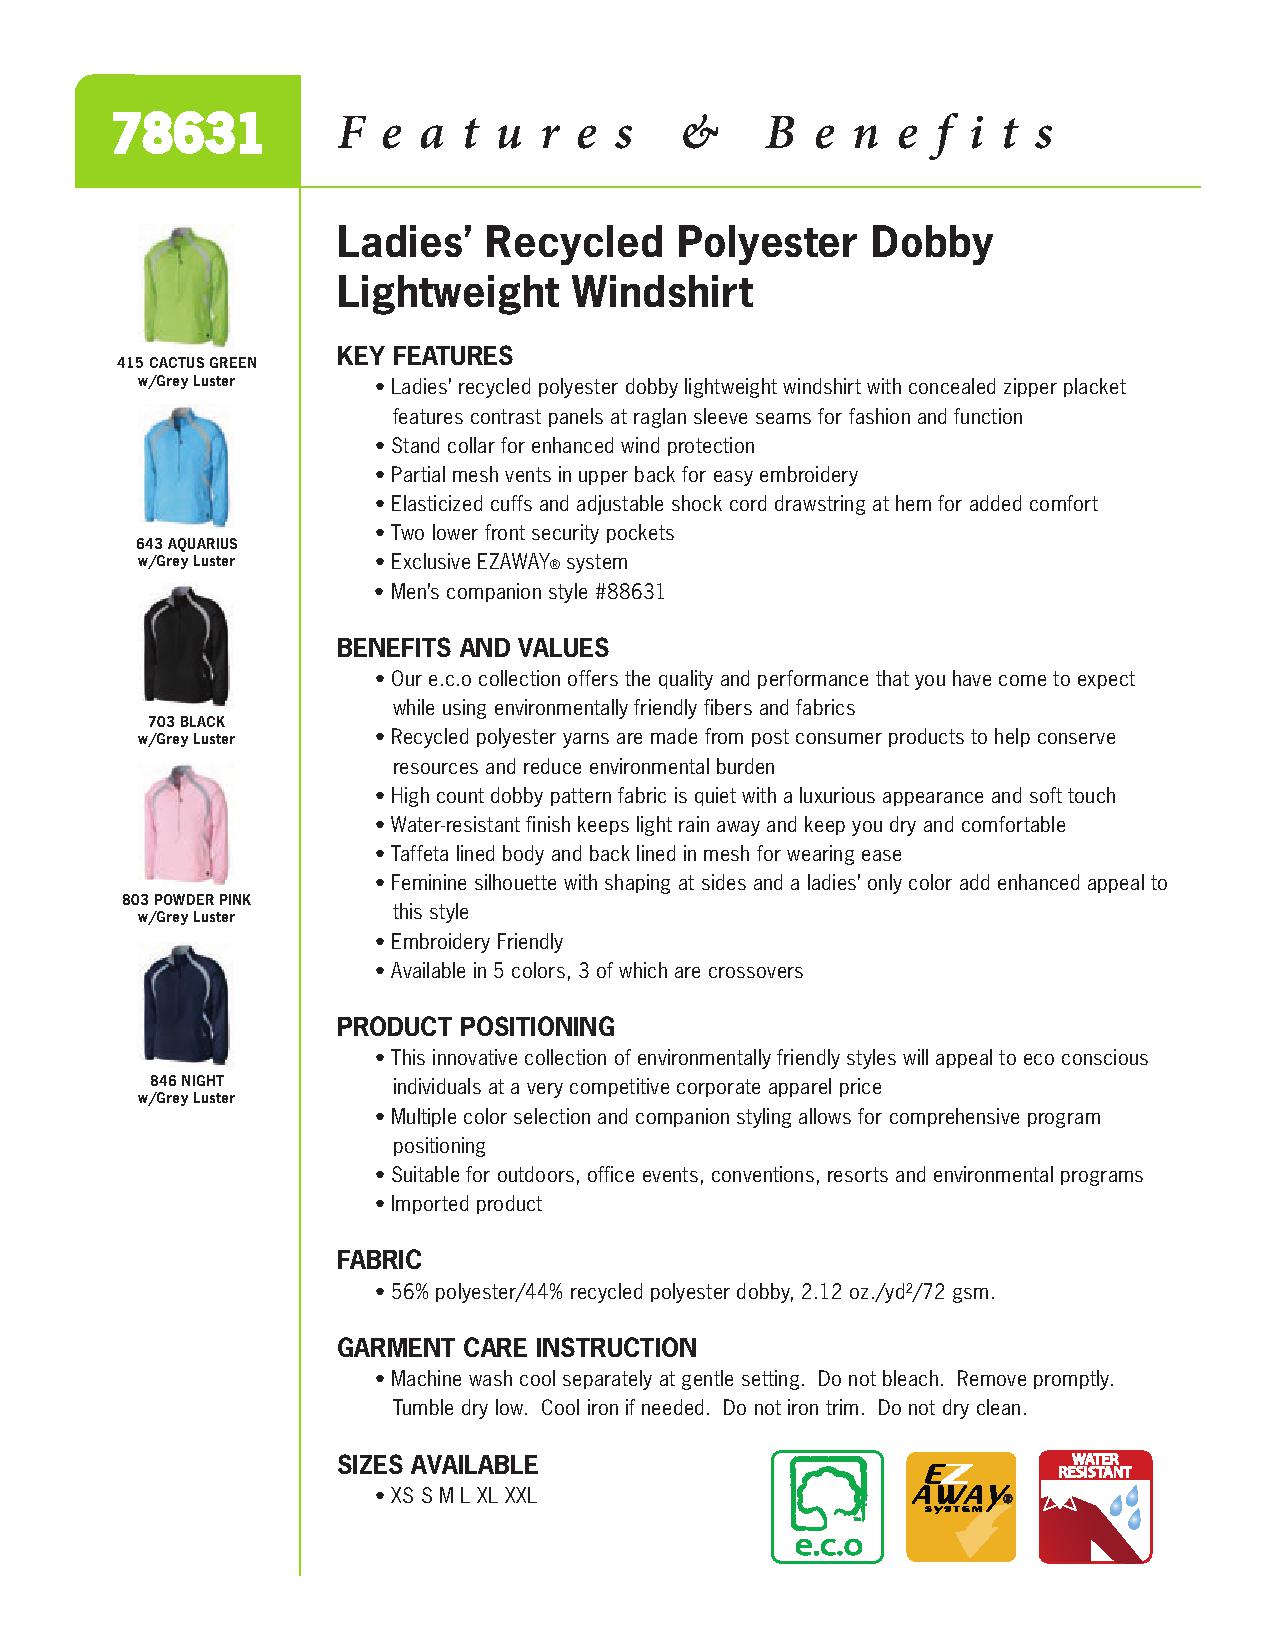 Ash City e.c.o Outerwear 78631 - Ladies' Recycled Polyester Dobby Lightweight Windshirt